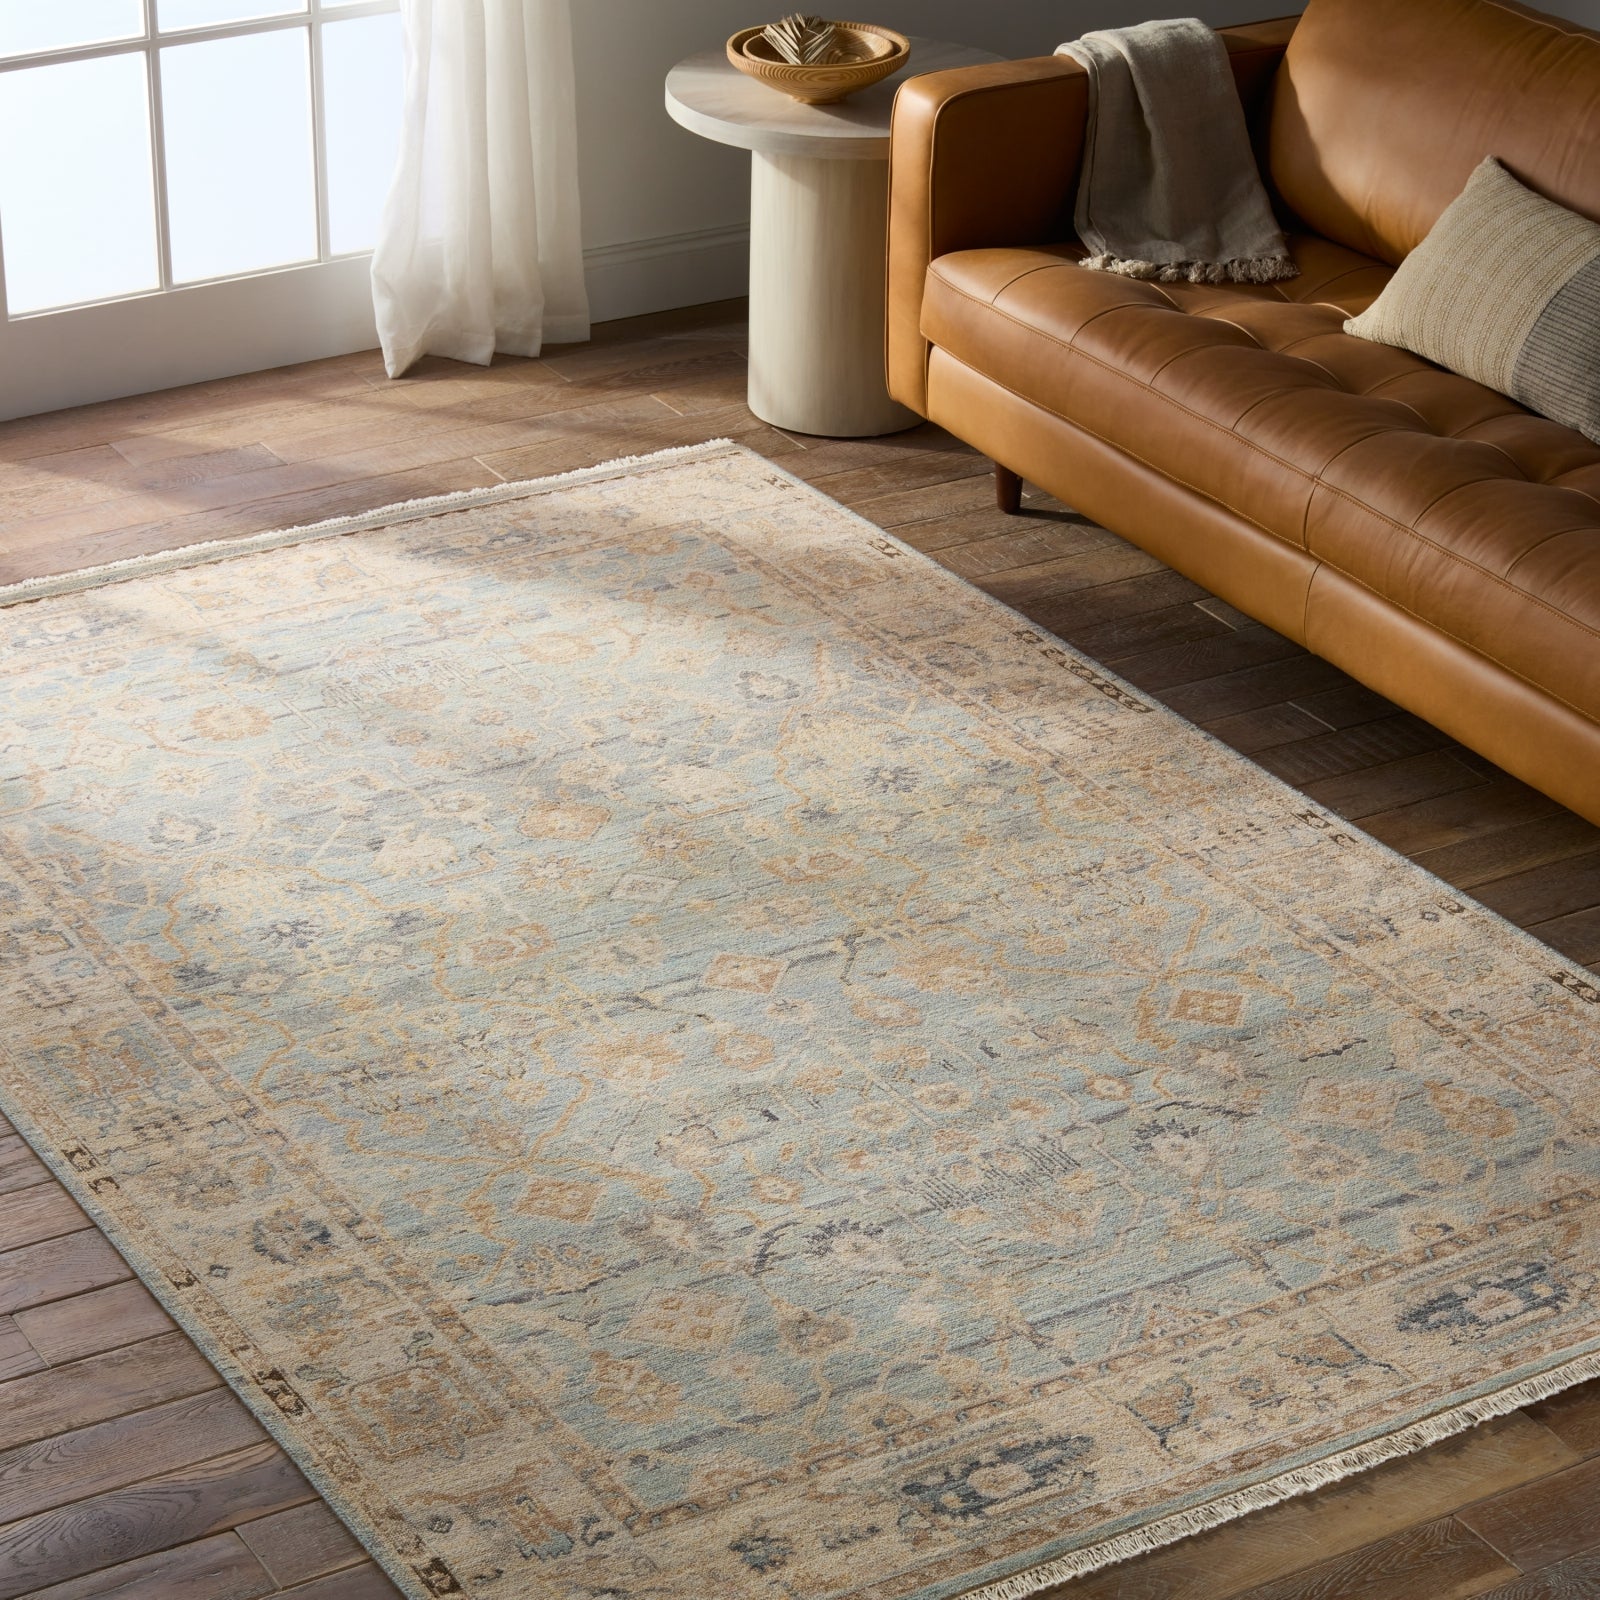 Jaipur Living Someplace In Time Resonant SPT05 Light Blue/Beige Area Rug Lifestyle Image Feature